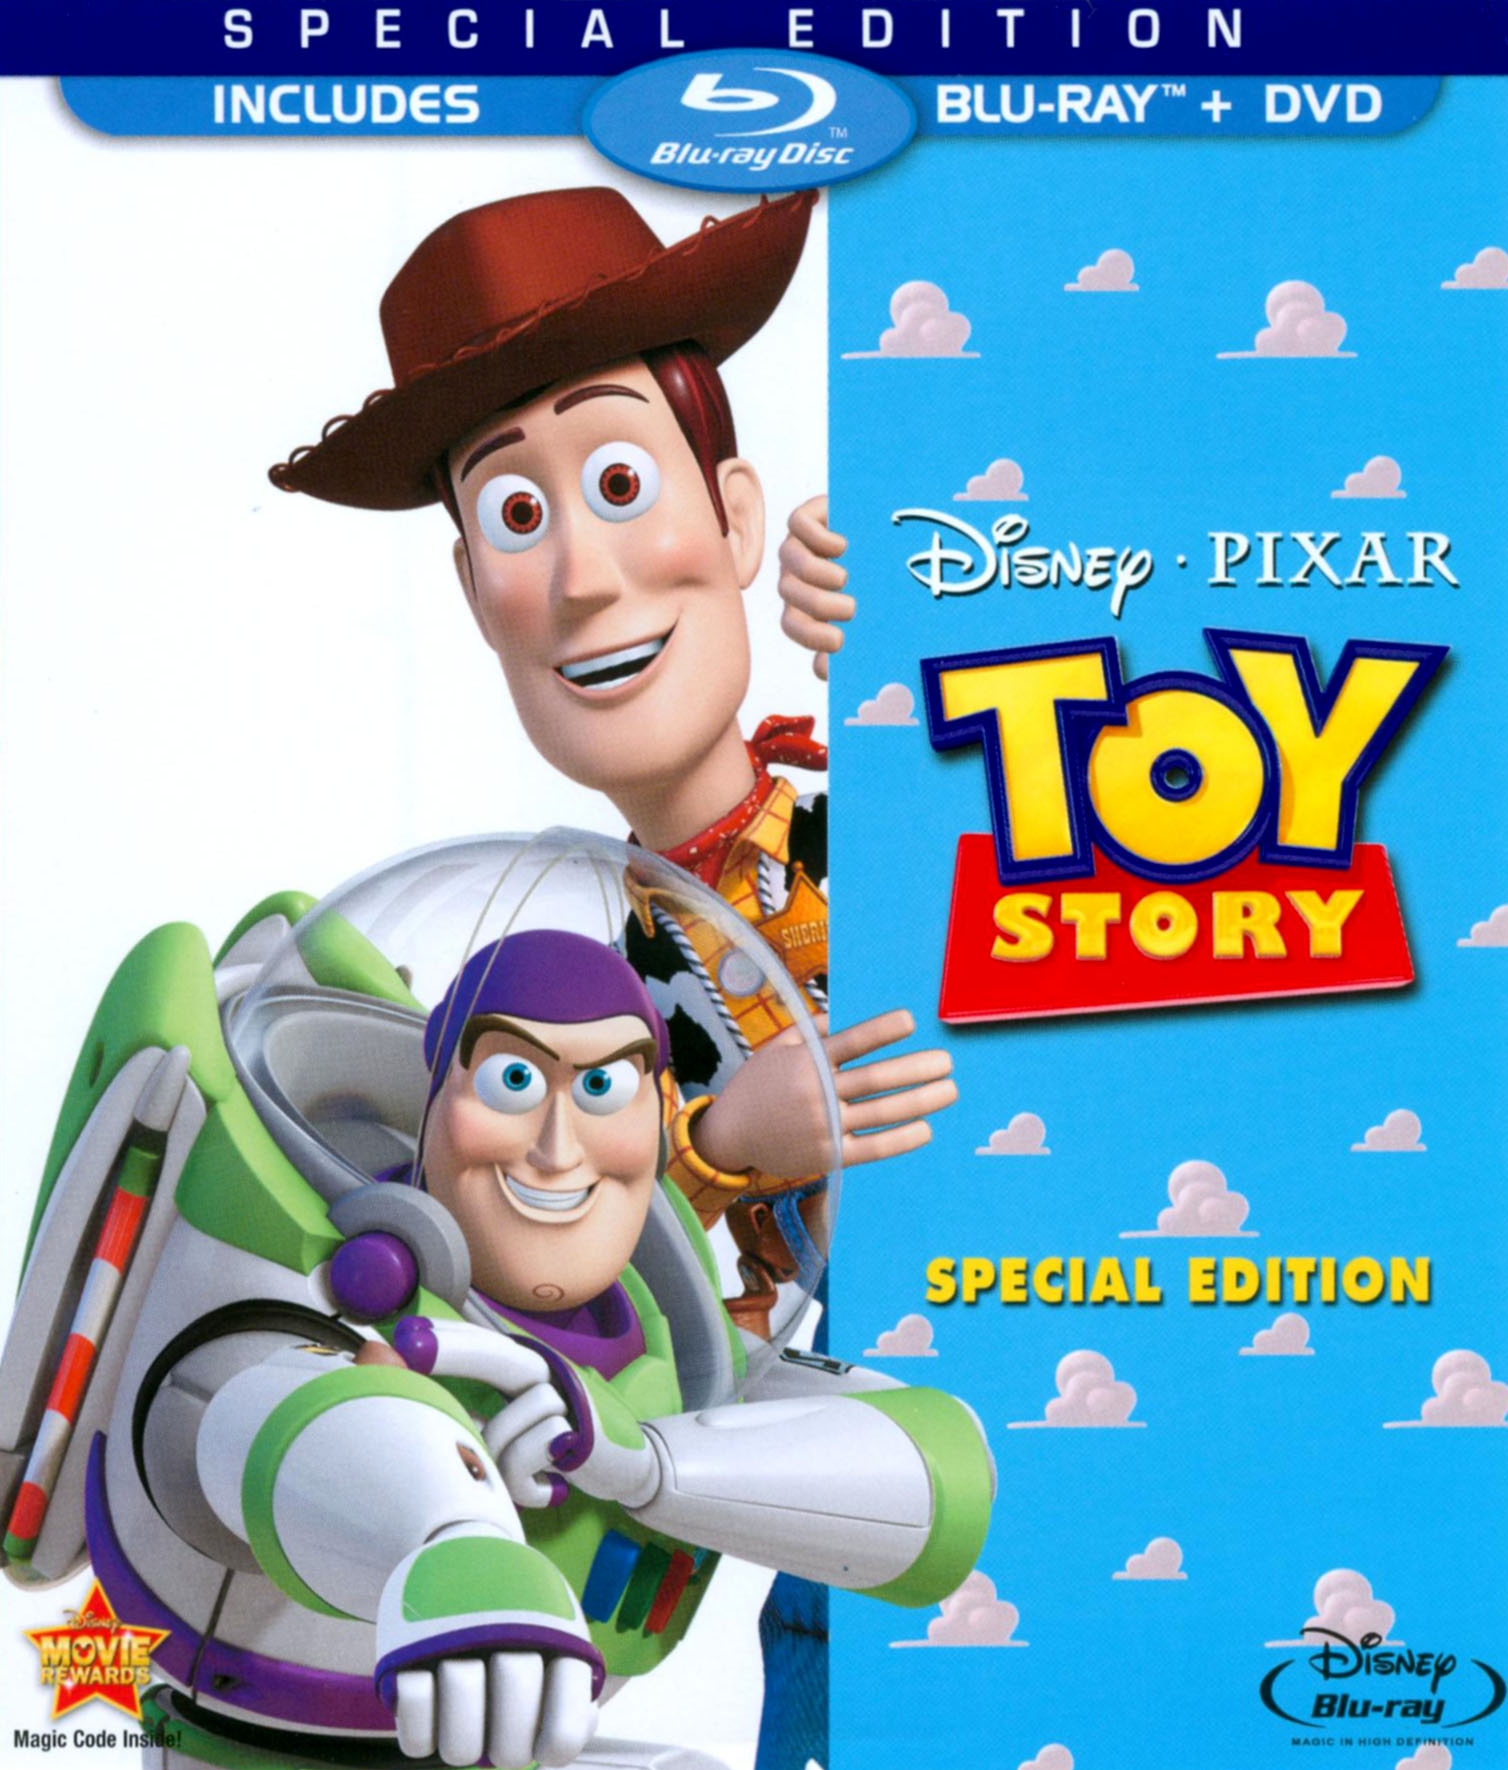 Toy Story 4-Movie Collection [Includes Digital Copy] [Blu-ray/DVD] - Best  Buy